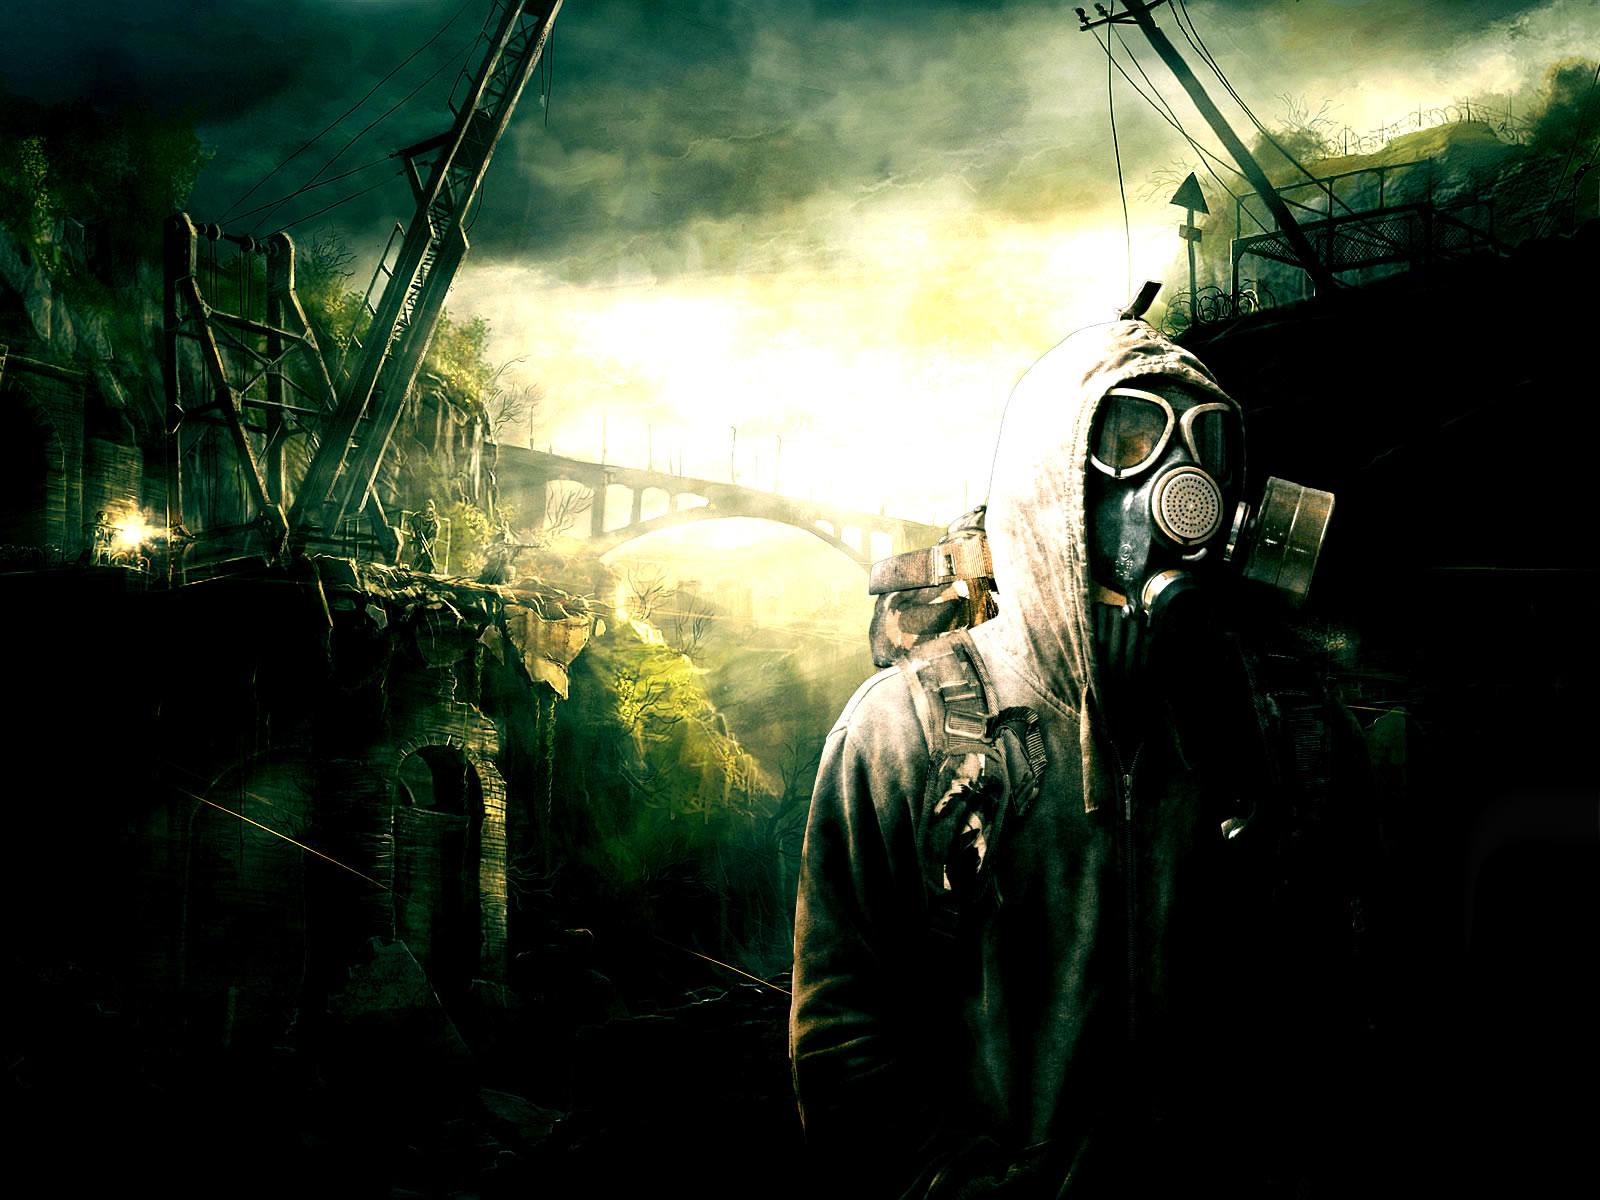 S.T.A.L.K.E.R. video game ambiance with urban ruins and eerie atmosphere.